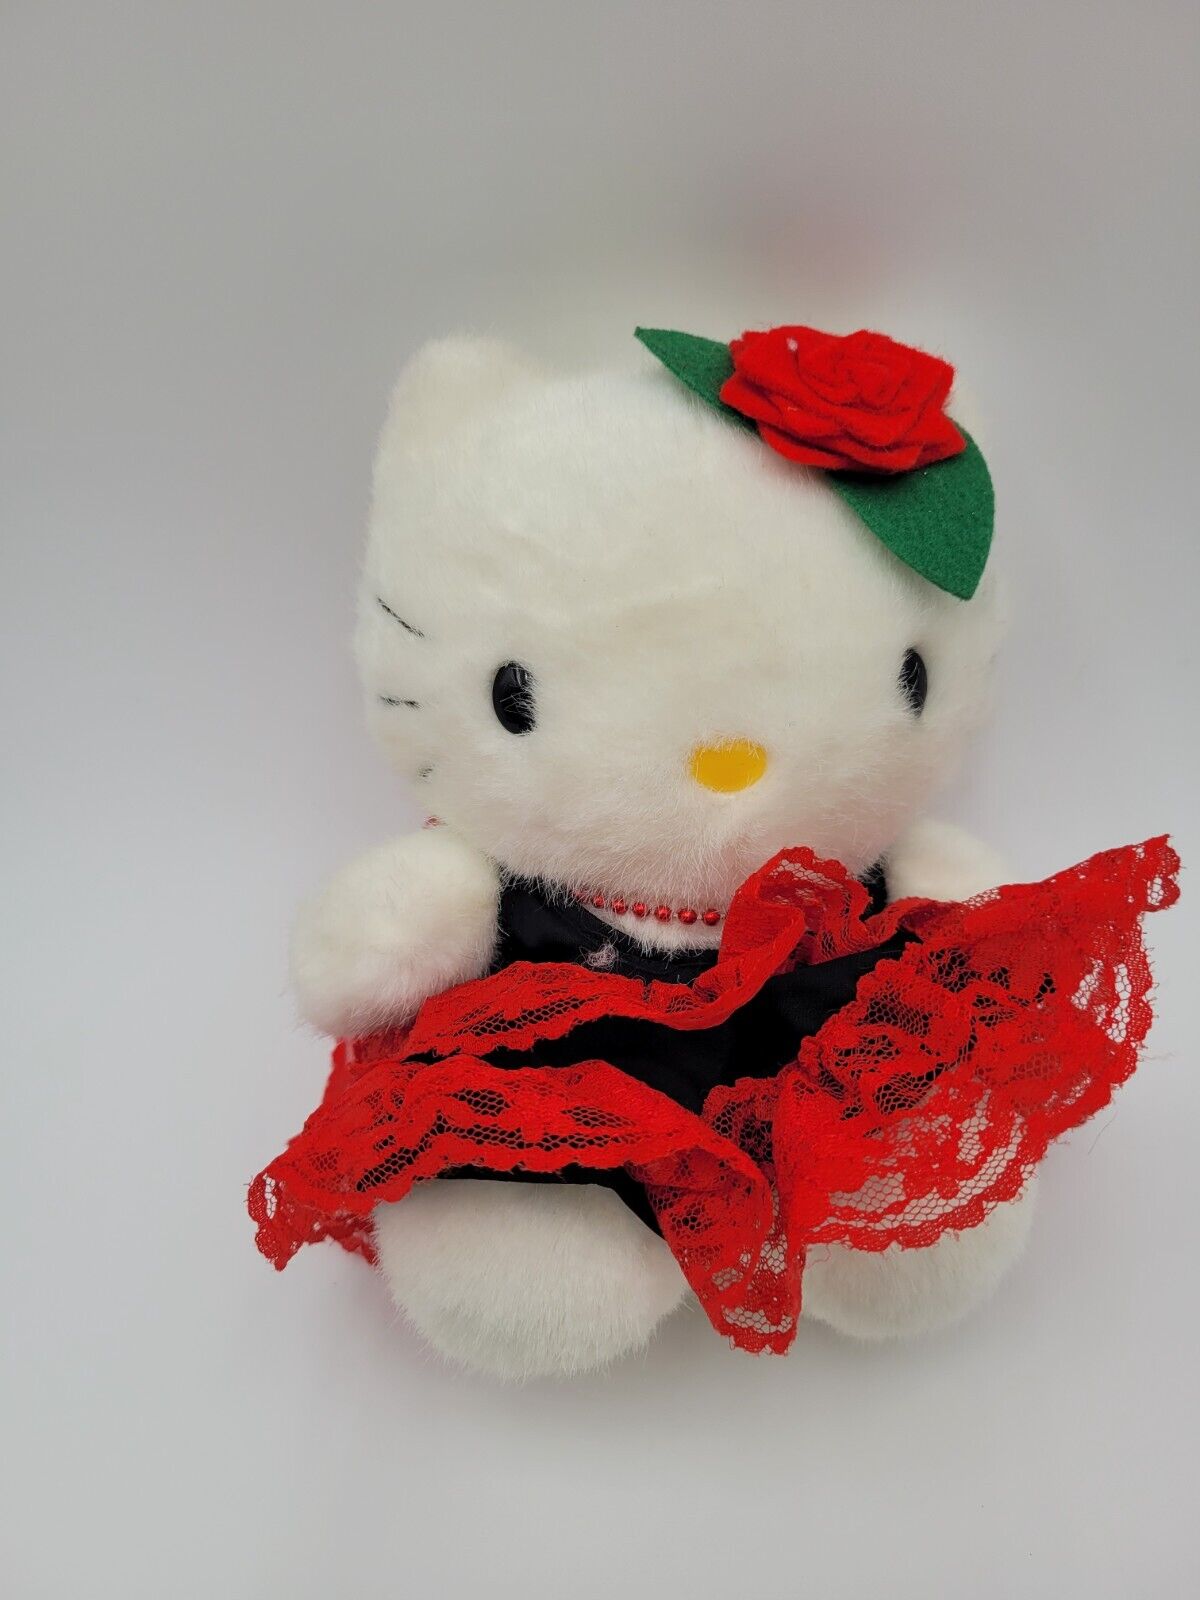 Vintage Hello Kitty Plush Doll Rose Red Lace Dress Salsa Dance Sanrio Anime Toy